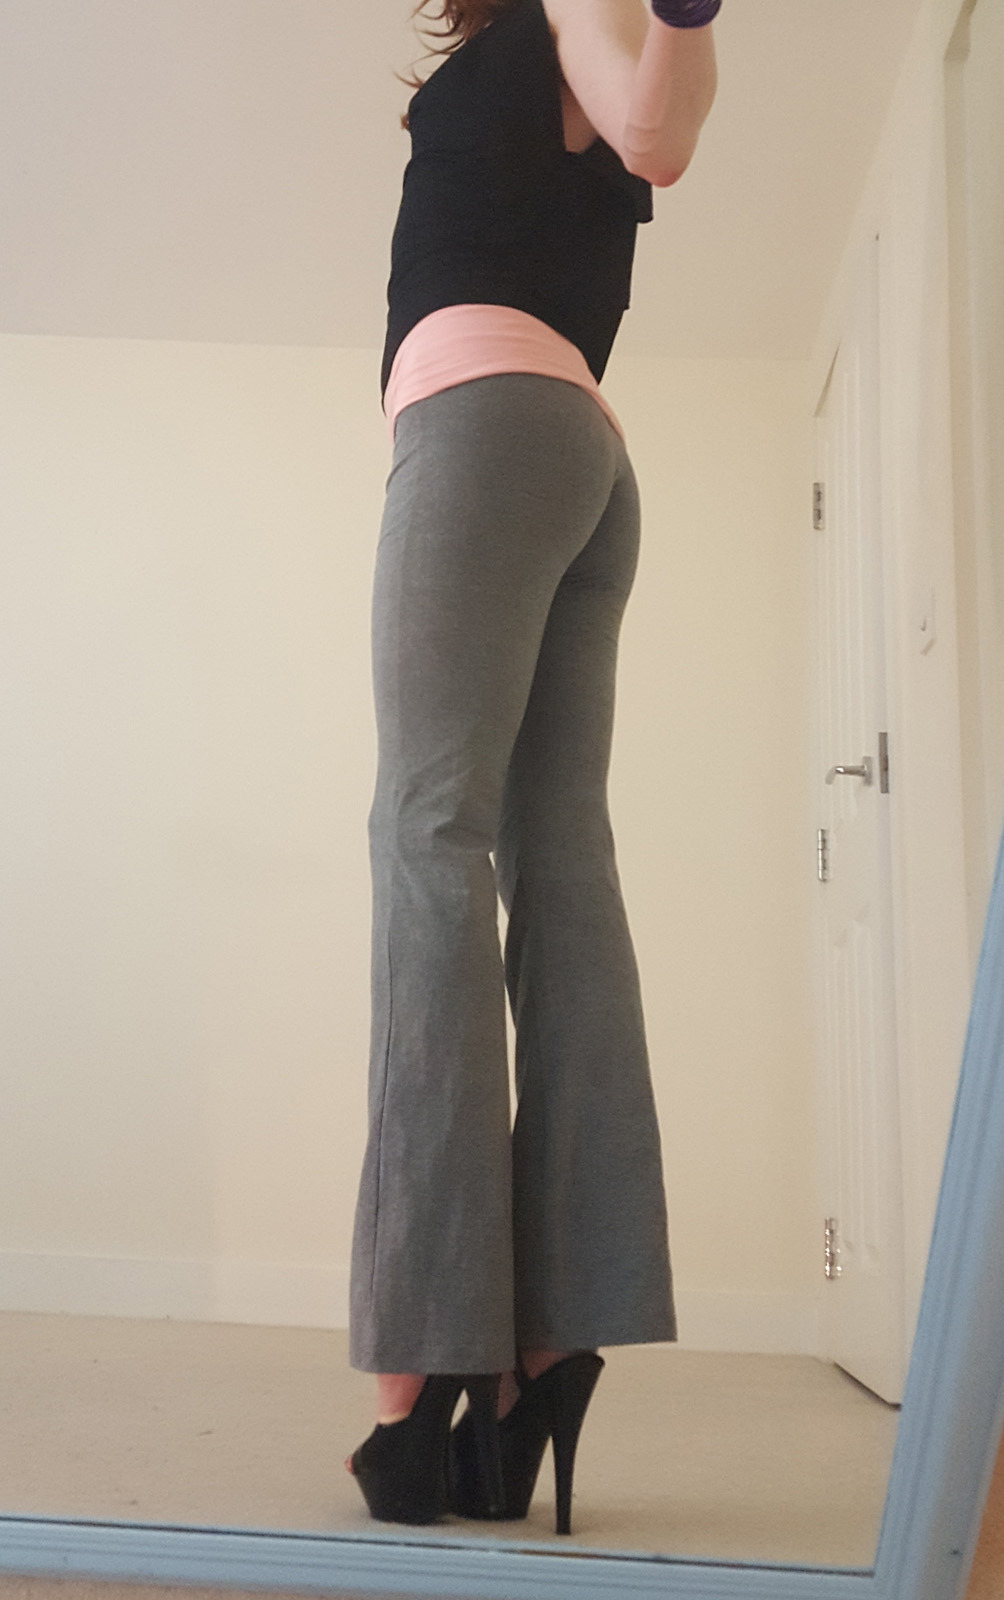 One of these days I’ll actually do yoga. Having the pants is just step one.